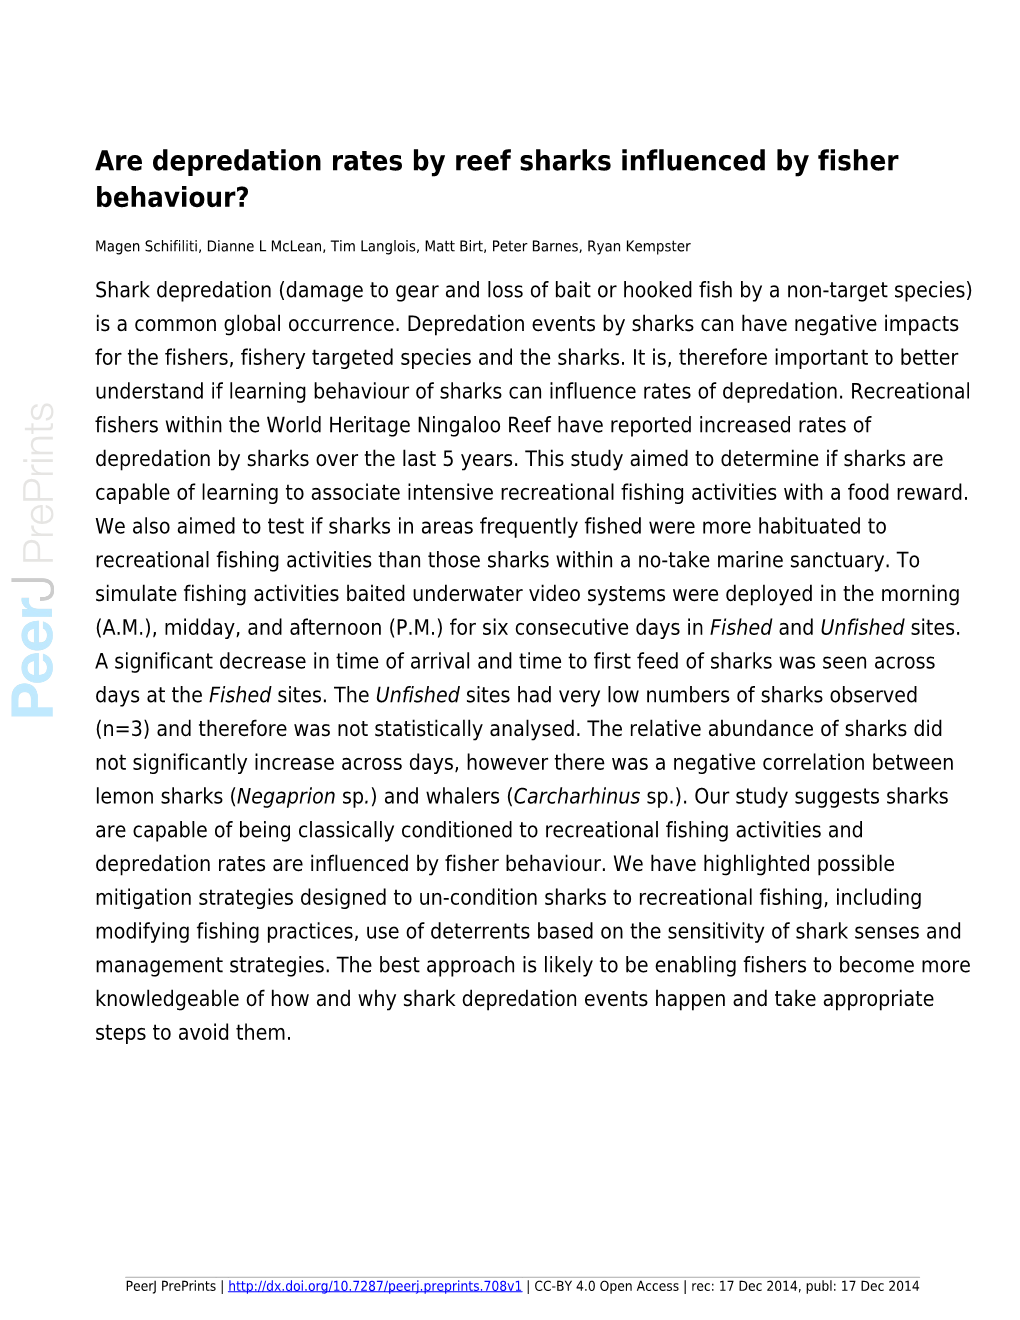 Are Depredation Rates by Reef Sharks Influenced by Fisher Behaviour?